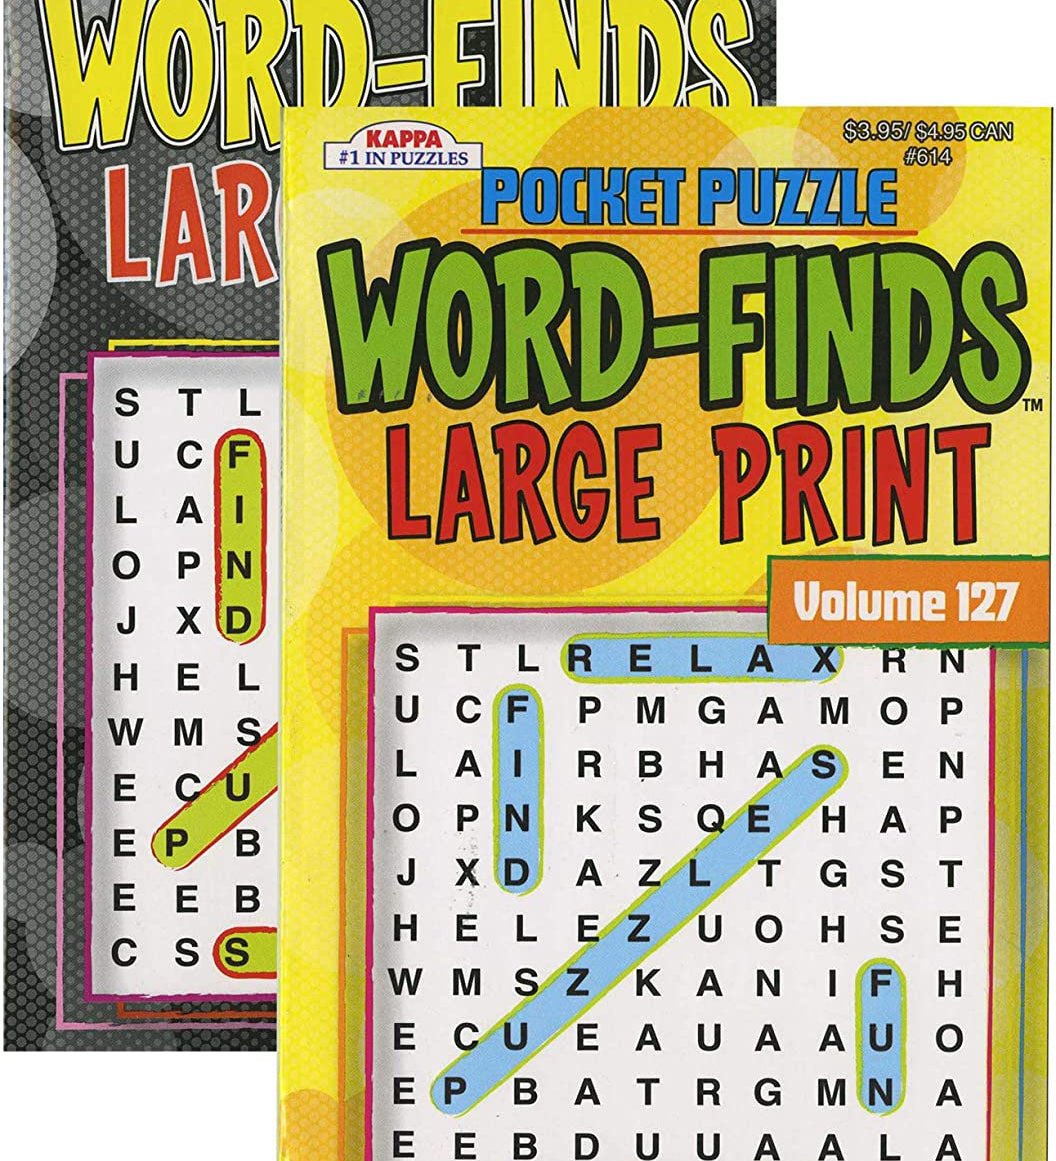 KAPPA Pocket Puzzle Word Finds Large Print | Digest Size.